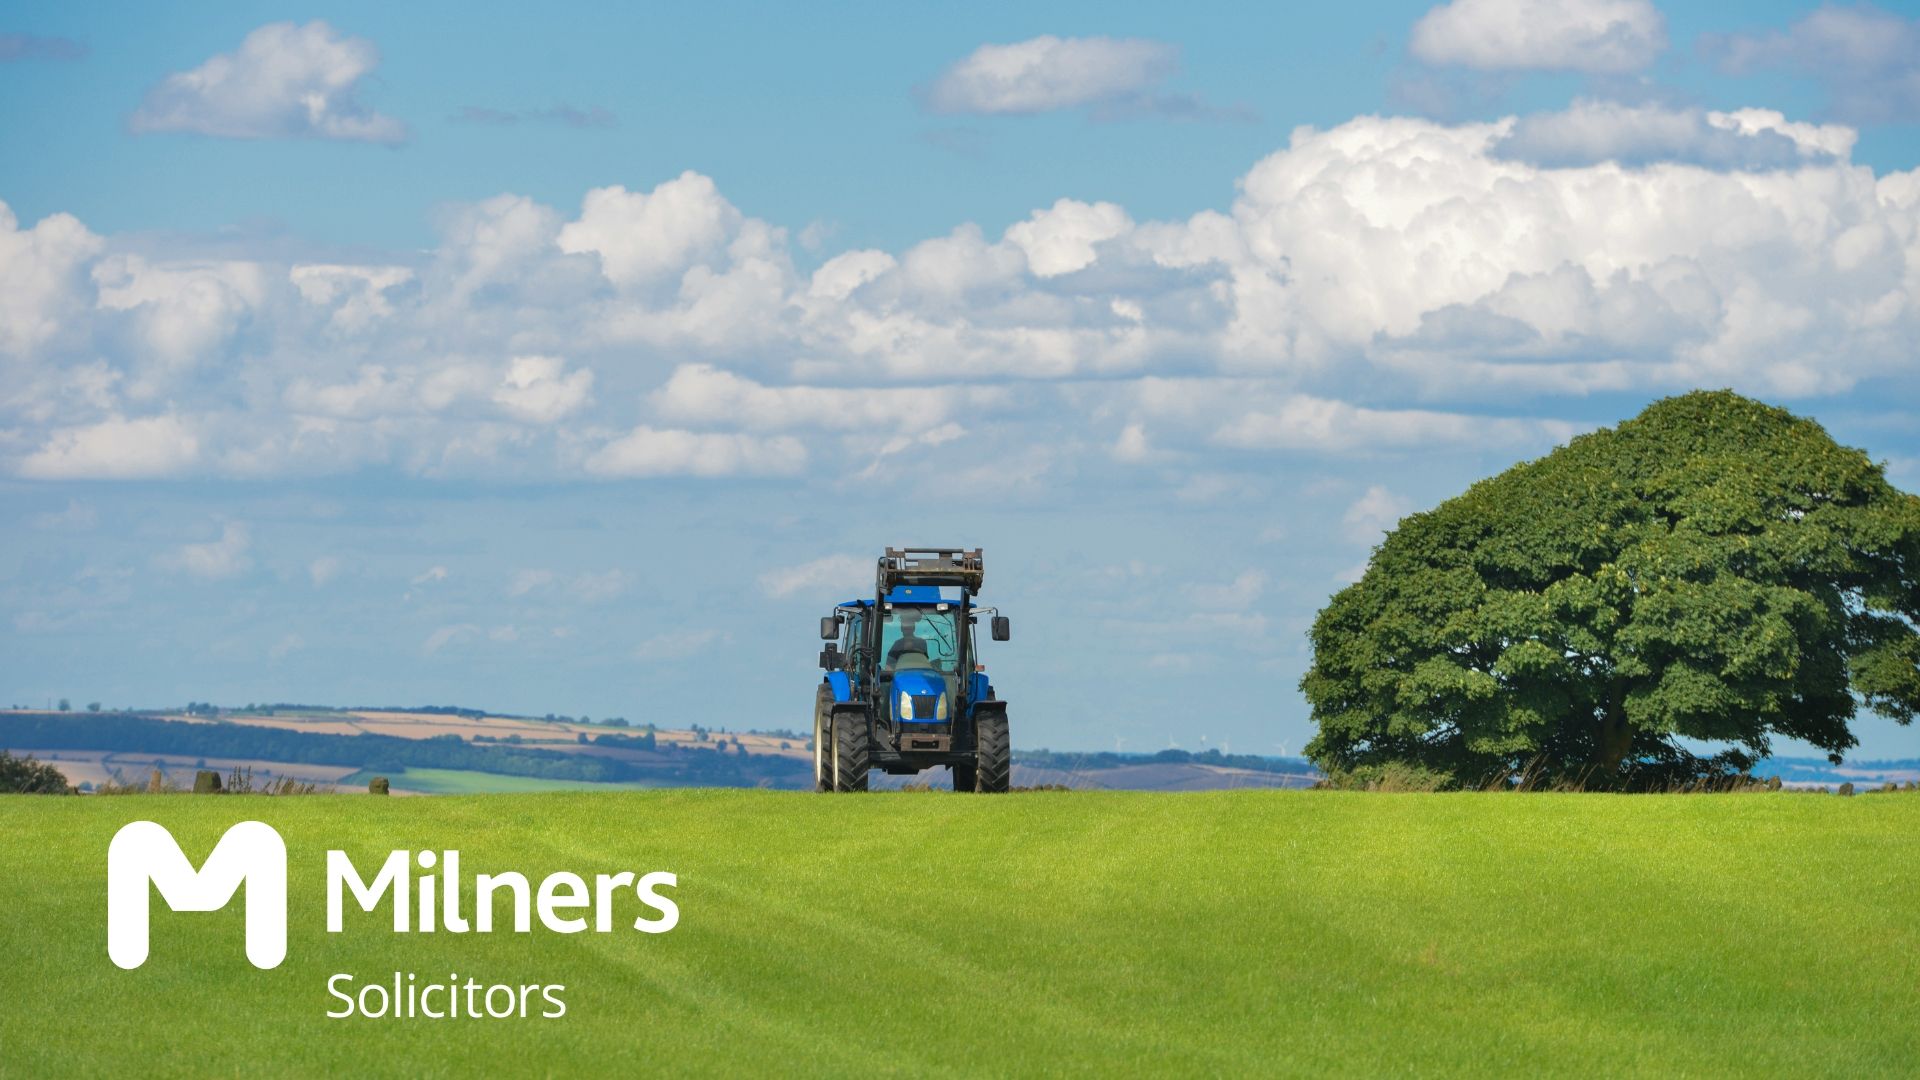 Many farming partnerships operate without a written agreement. This can lead to disputes down the line. Learn how to avoid these common pitfalls.